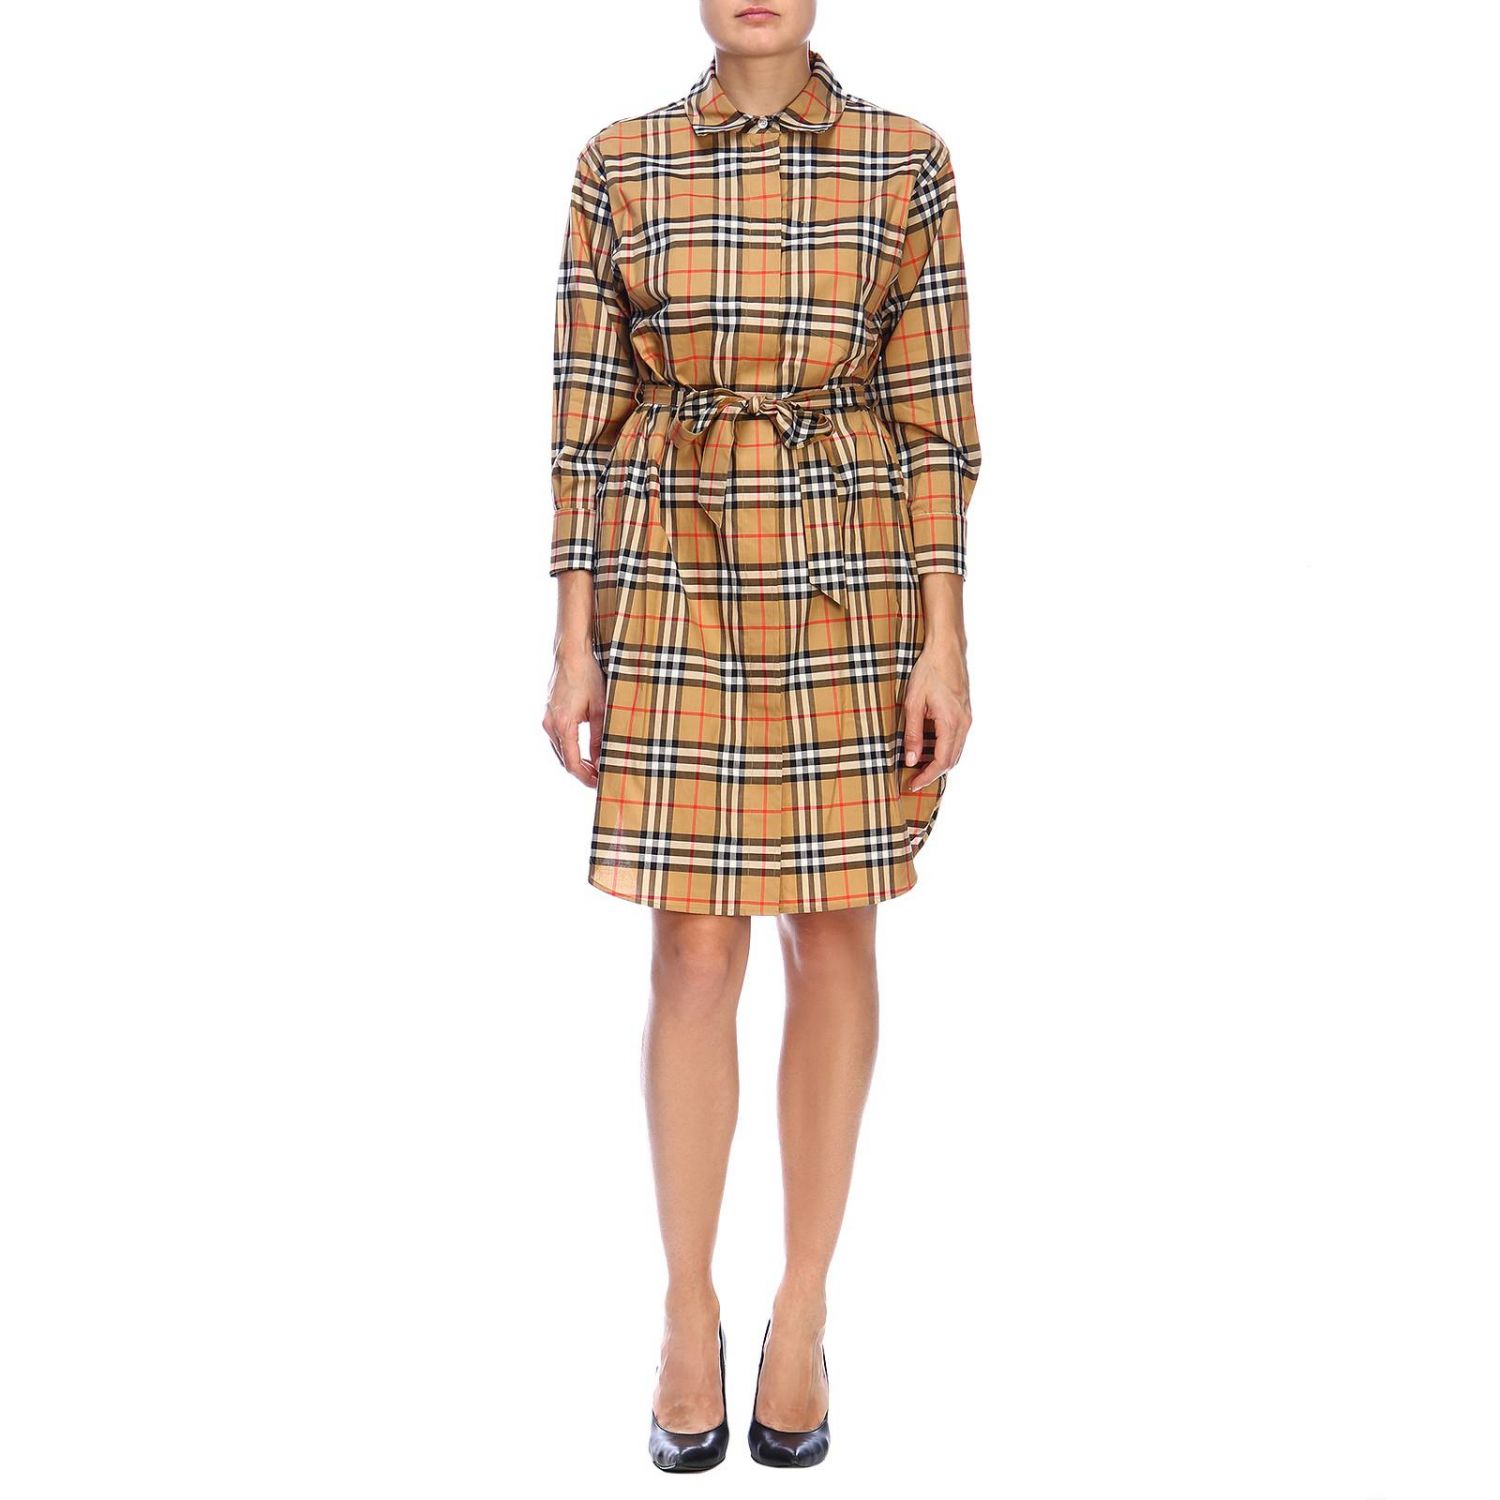 Burberry Outlet: Isotto chemisier dress with check print | Dress ...